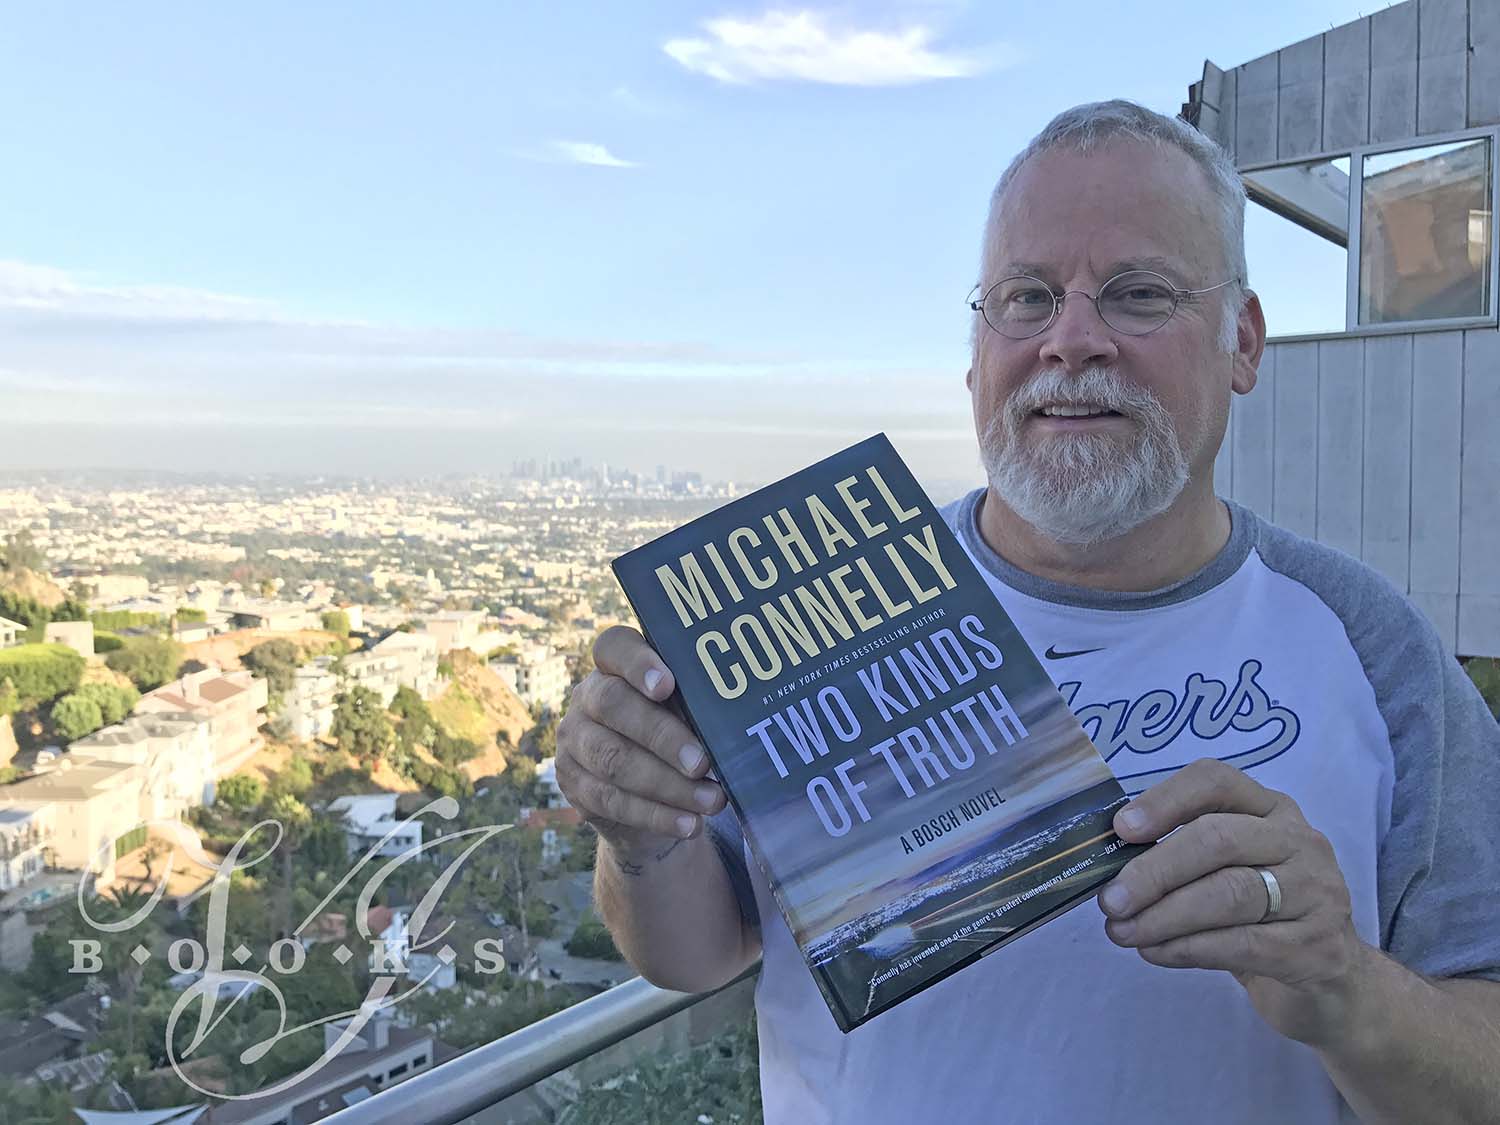 Author Michael Connelly